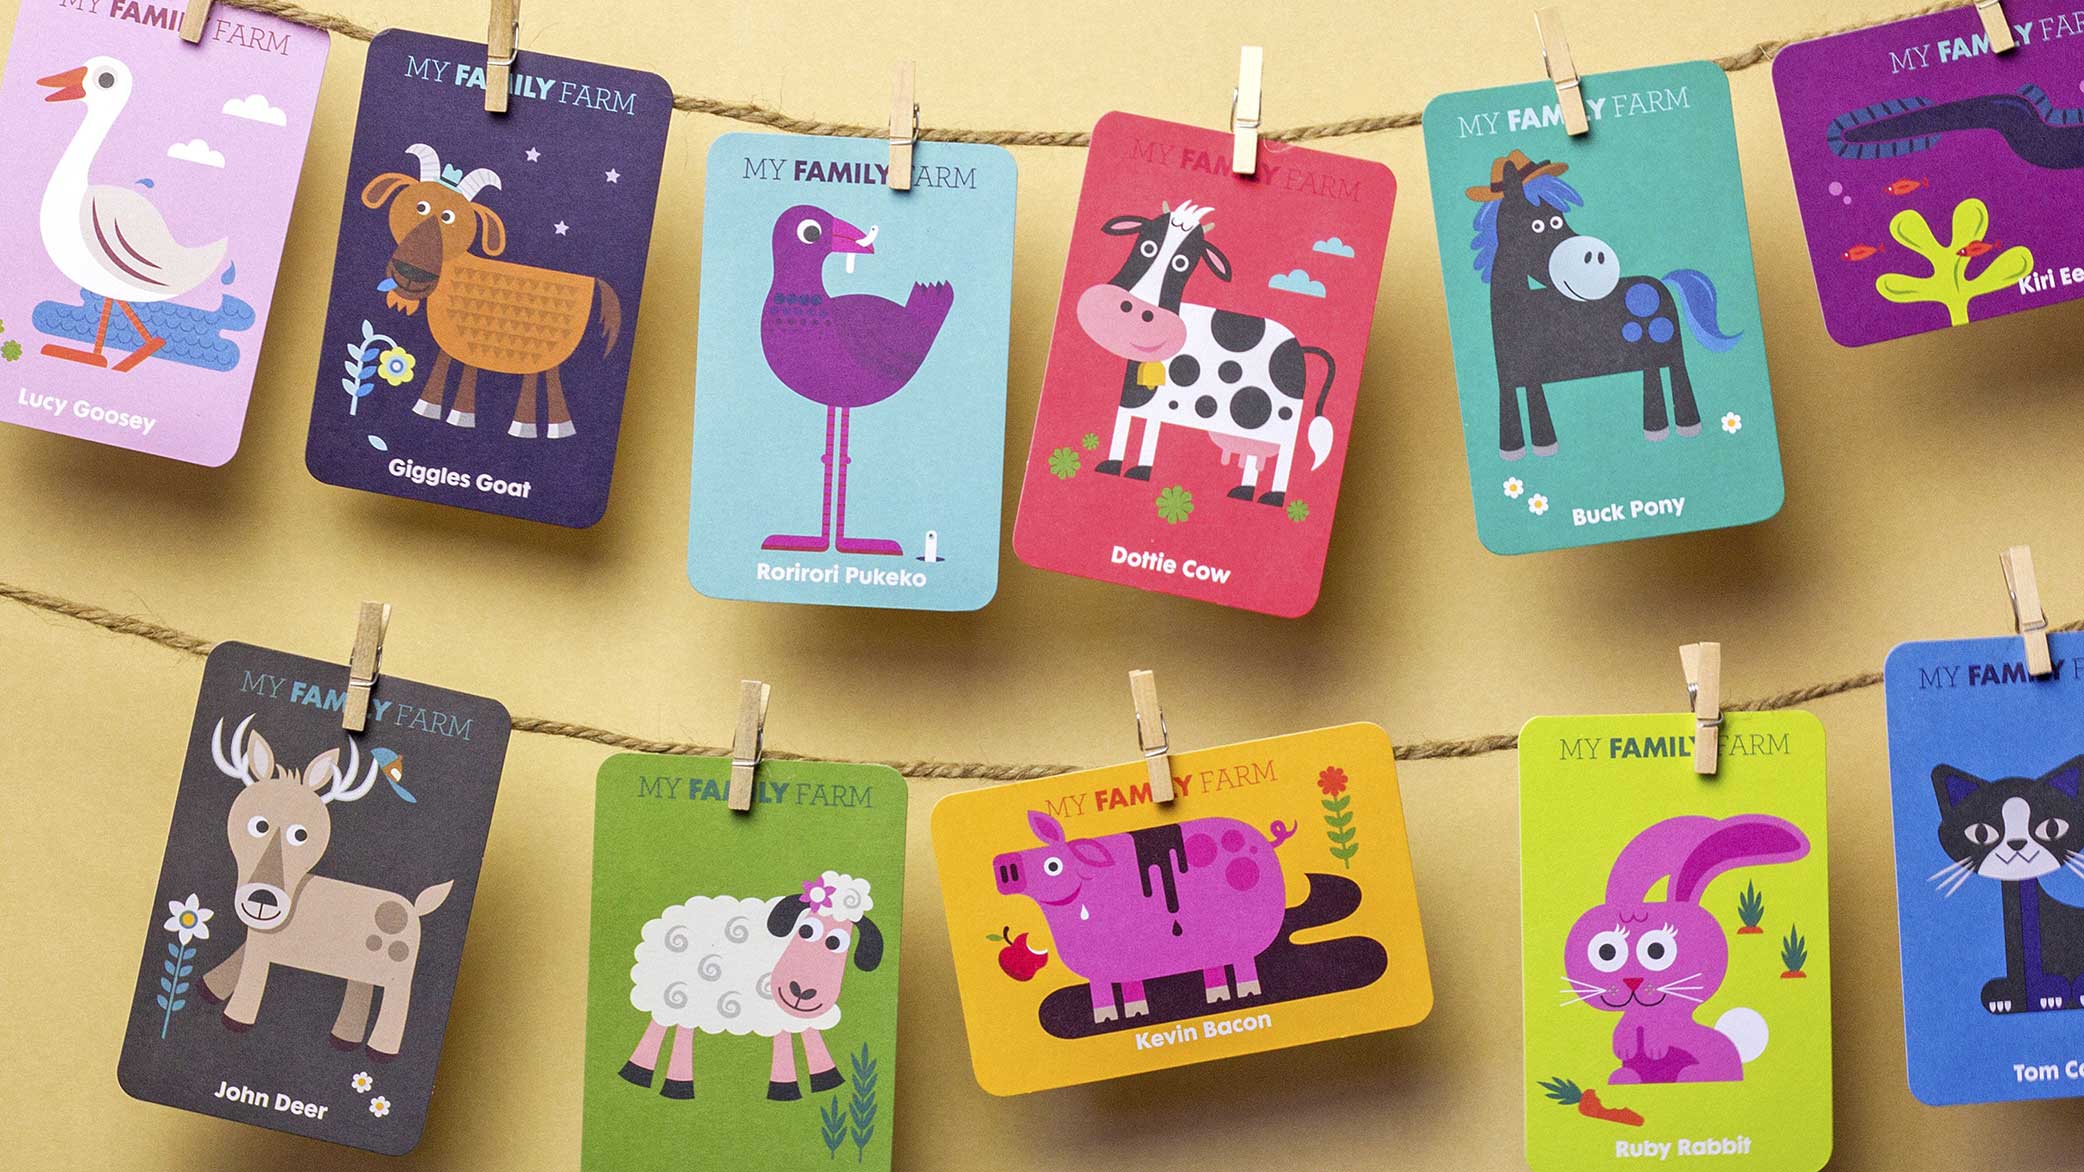 Colourful childrens' illustrations of animal cards on pegs